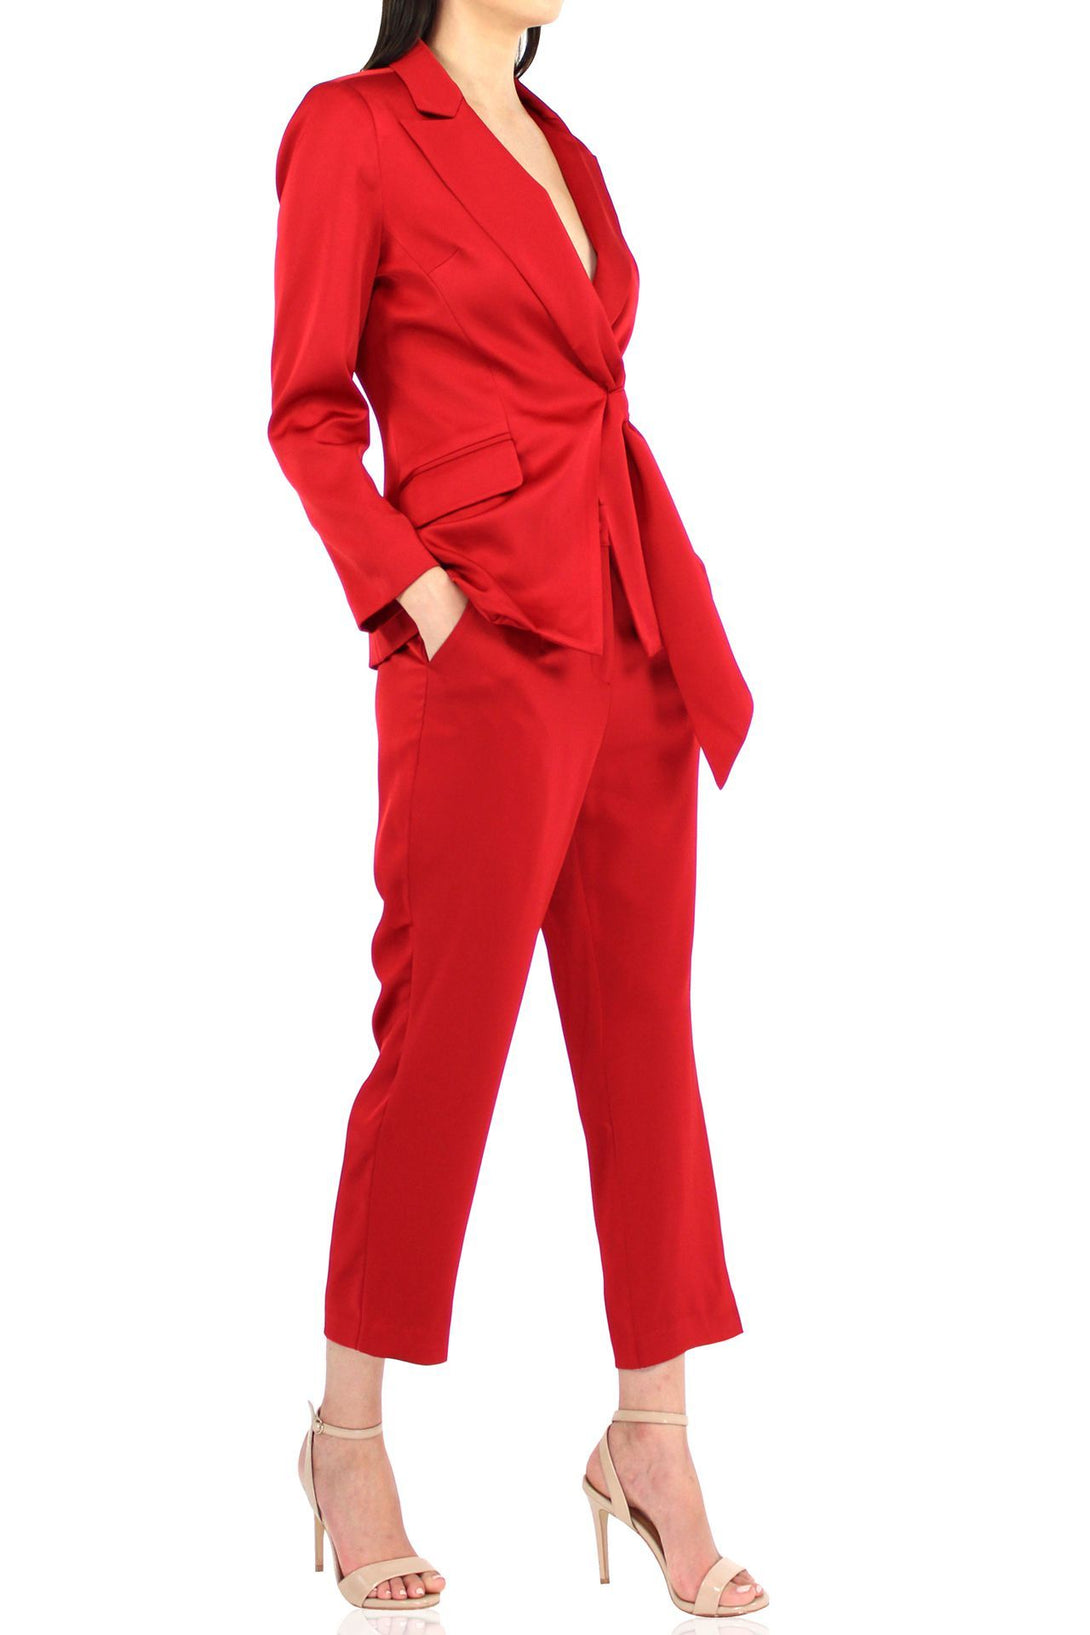 Designer-Belted-Matching-Suit-Set-In-Red-by-Kyle-Richard